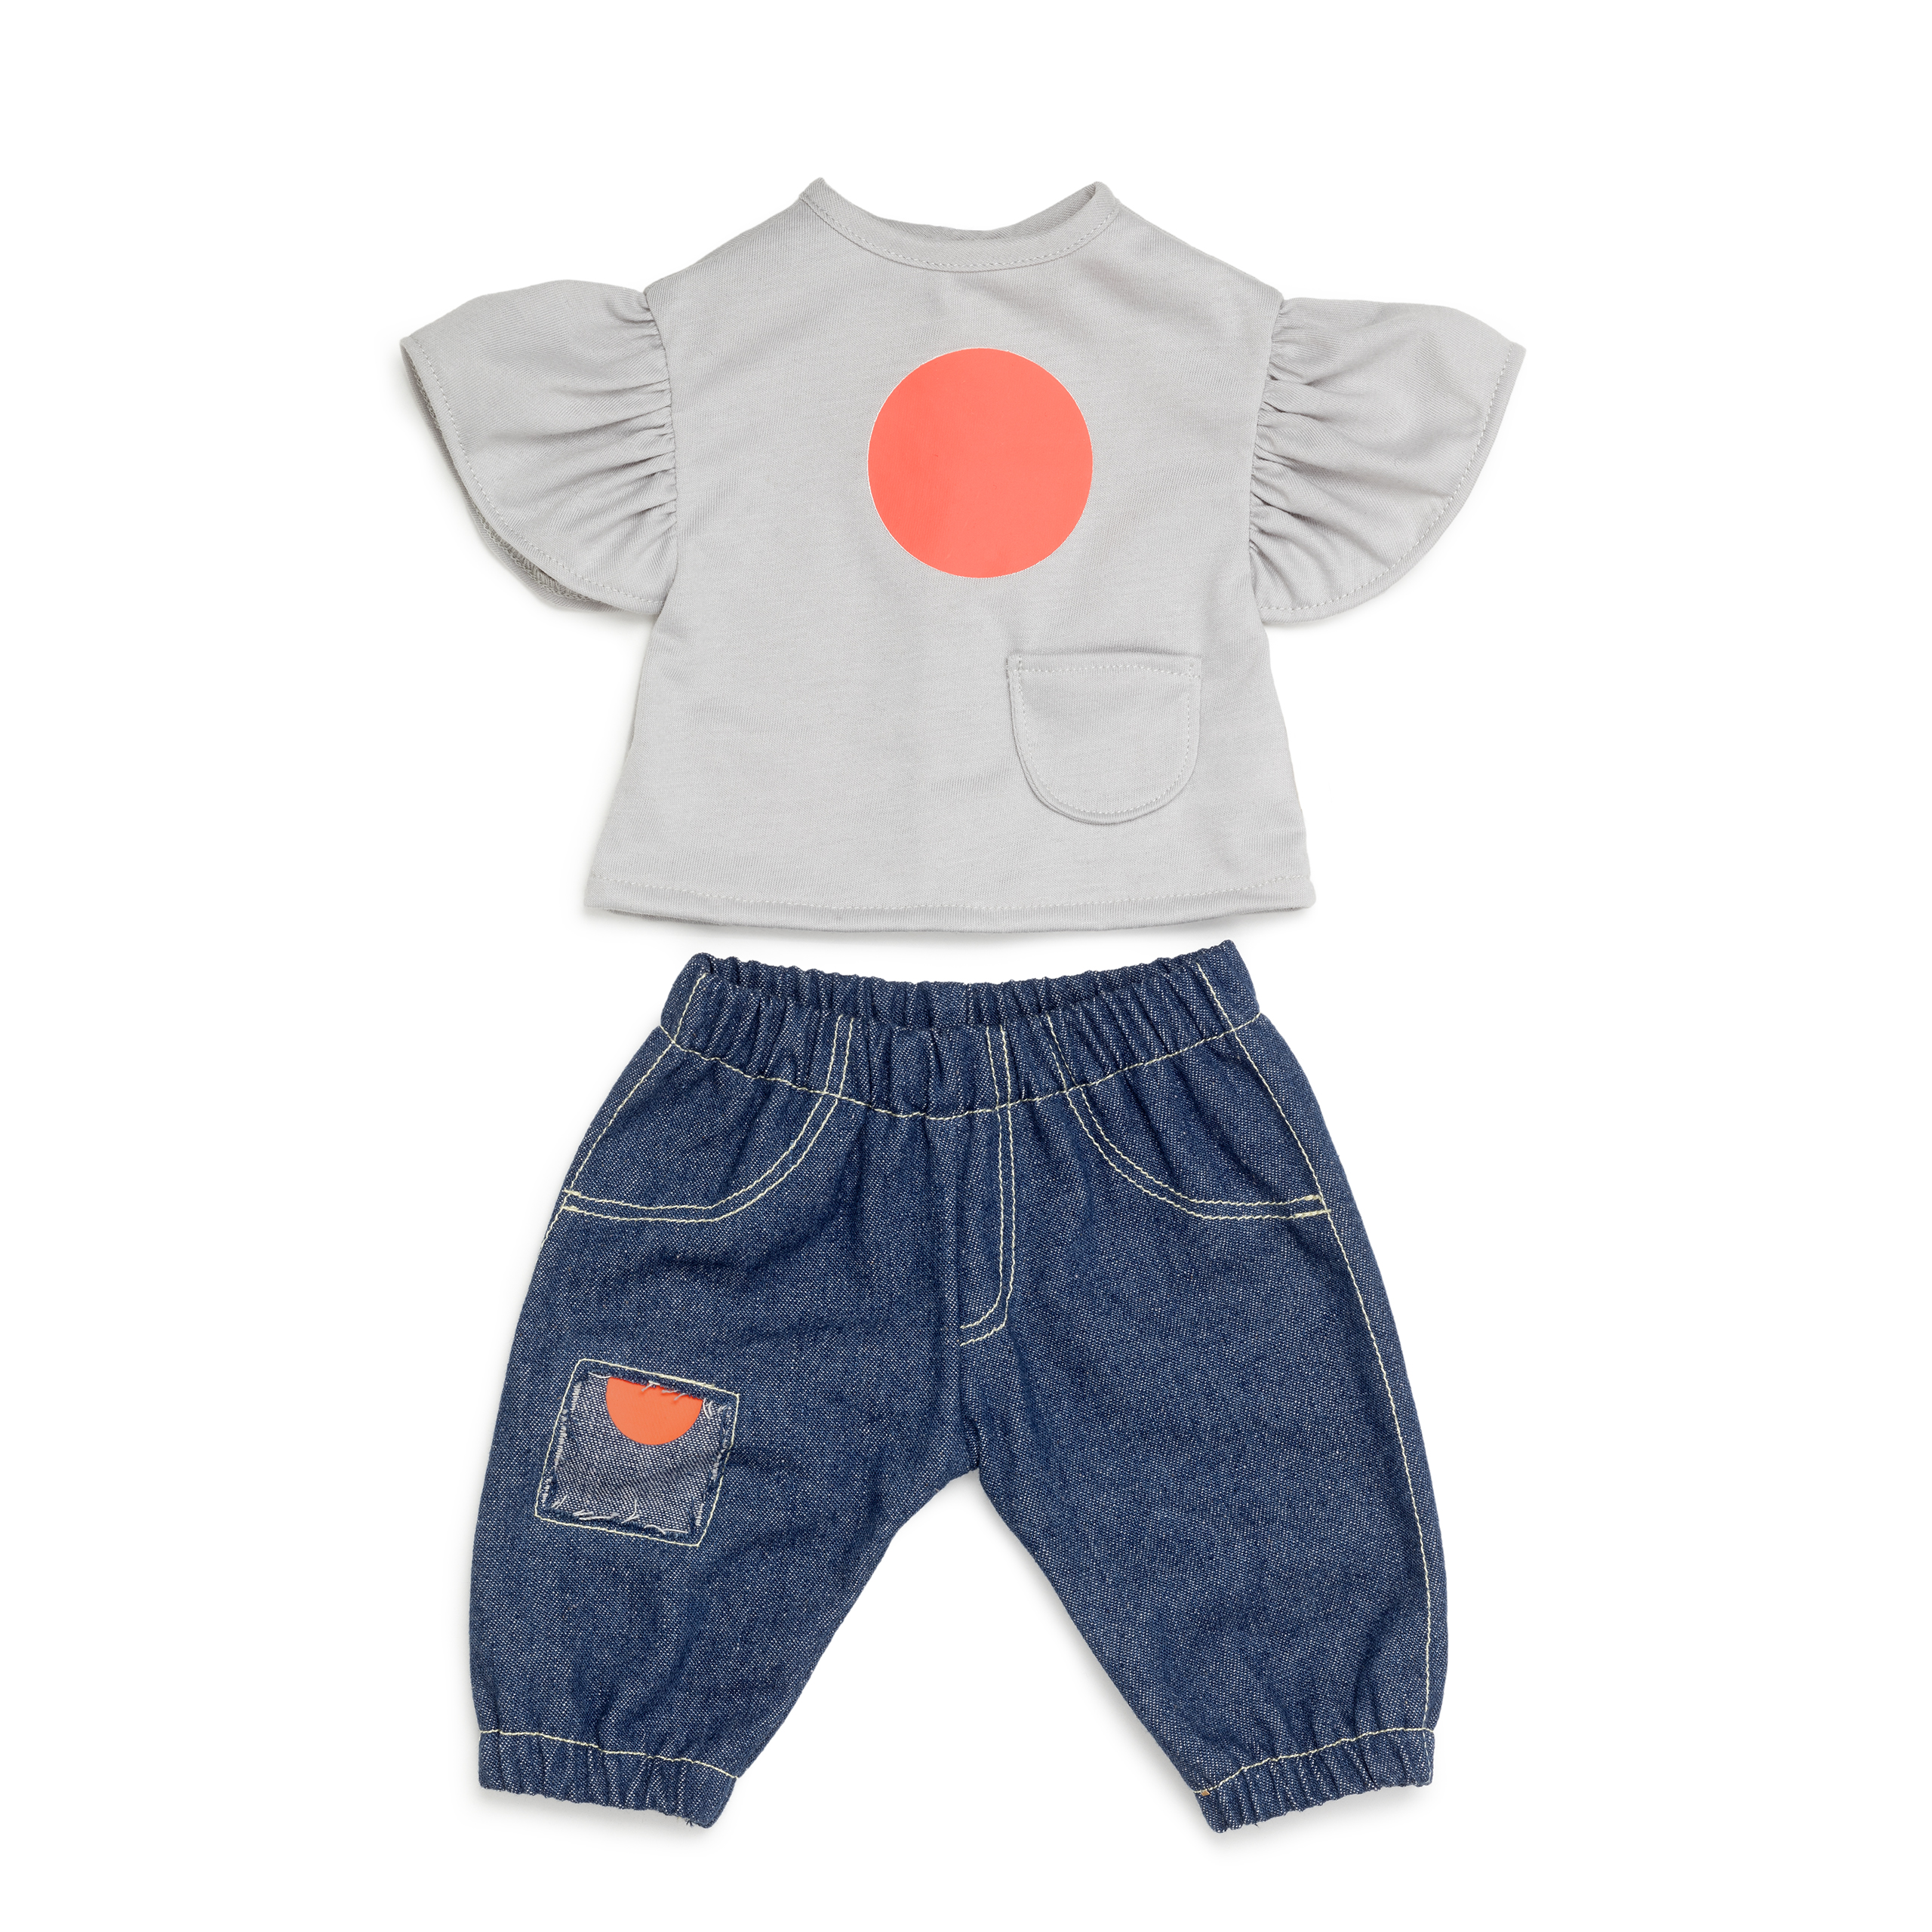 Doll clothes lundby	doll clothes jeans & t-shirt 45 cm